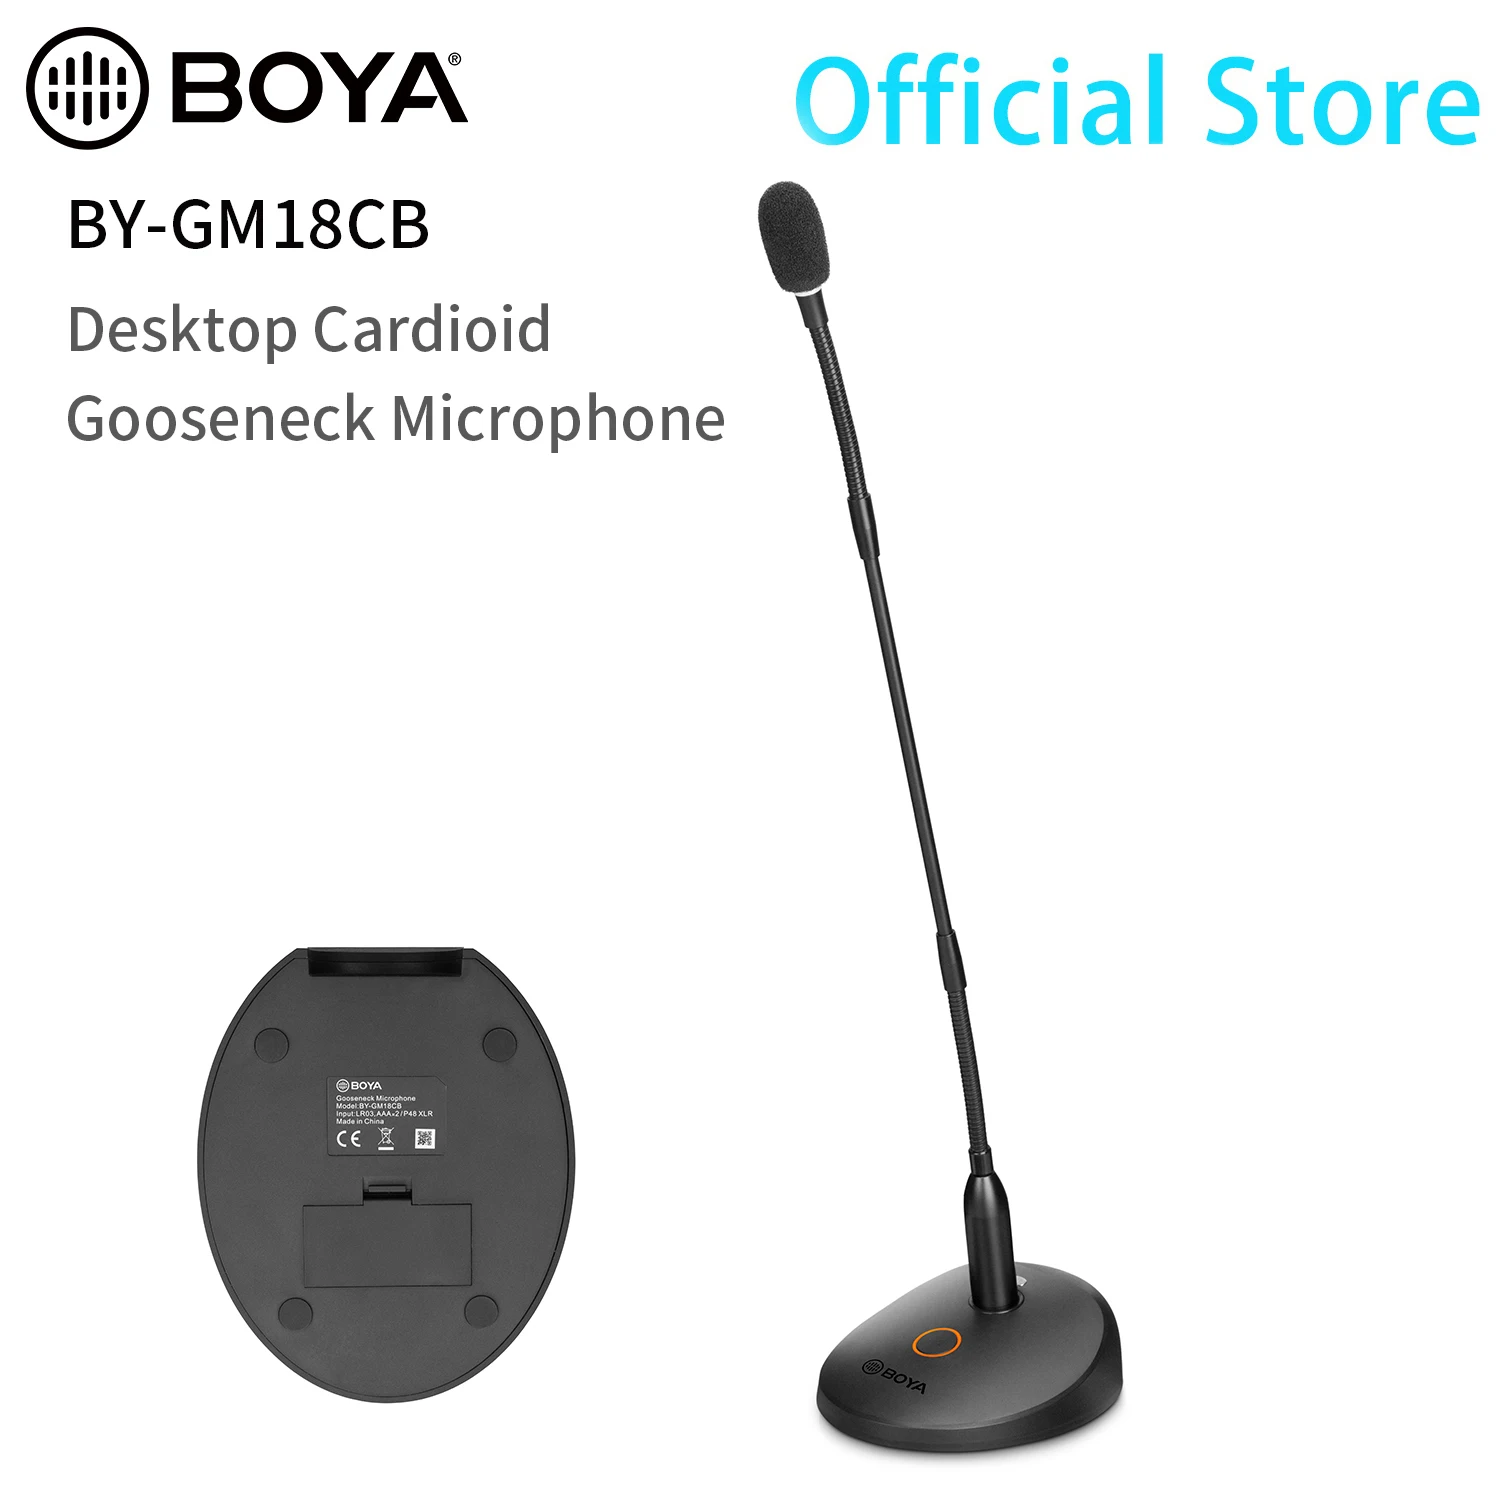 BOYA BY-GM18CB Desktop Meeting Conference Gooseneck Condenser Microphone with XLR Connector for Video Conferences Streaming enlarge